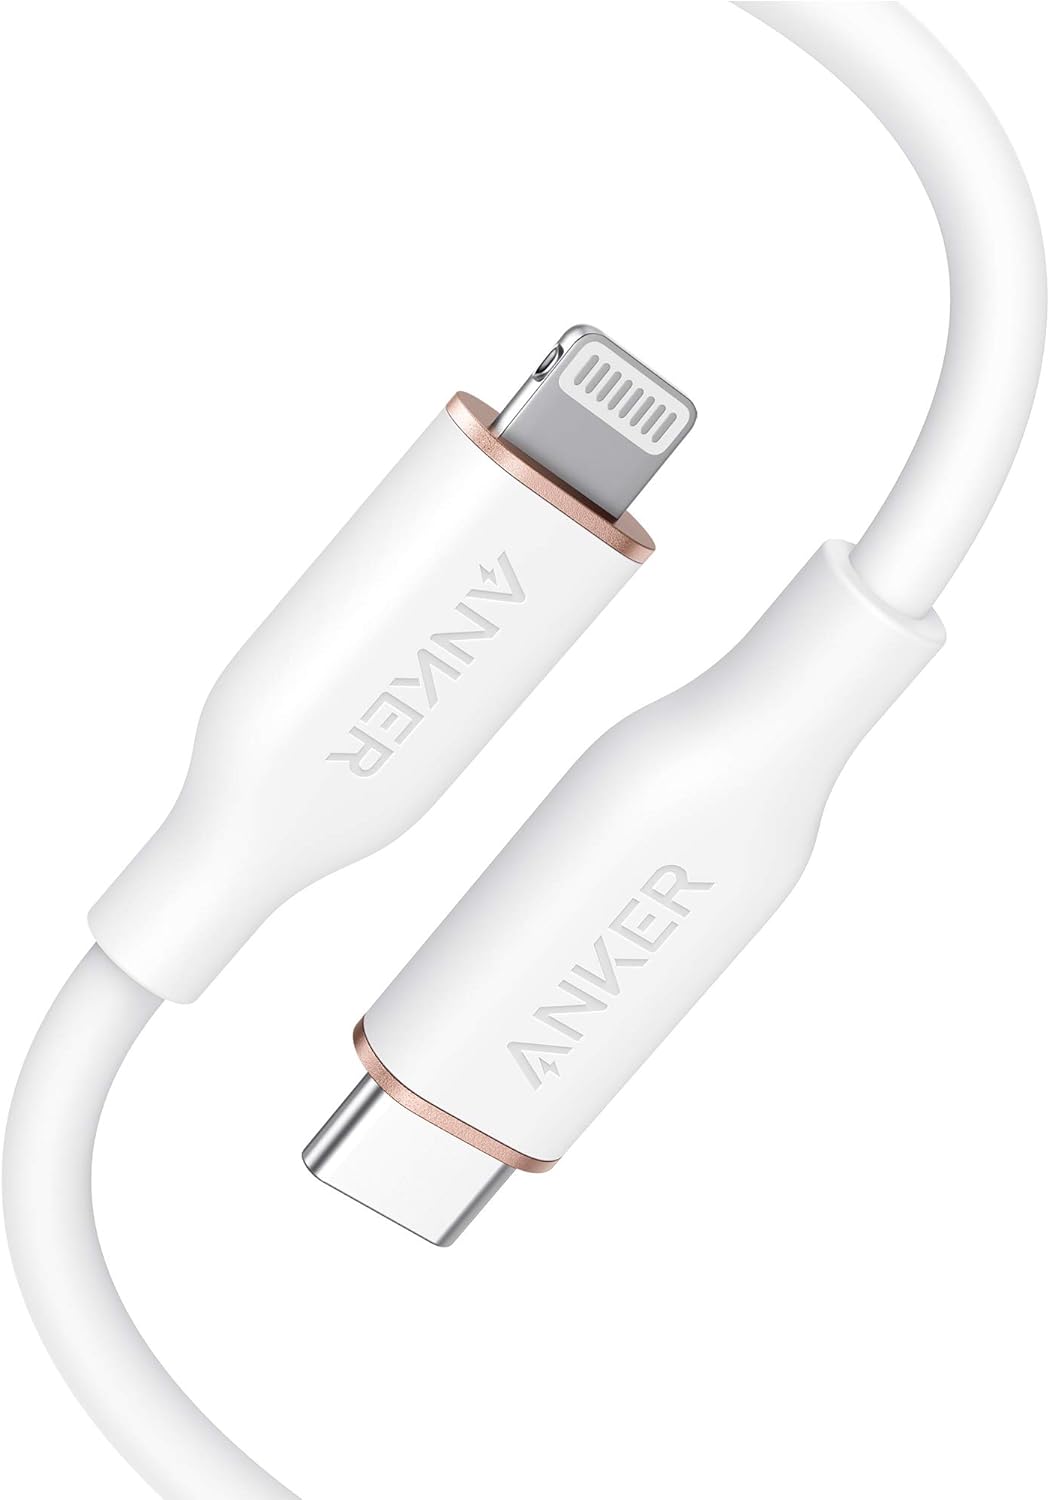 Anker PowerLine lll Flow USB-C with Lightning Connector (3ft) - Miles Telecom Trading LLC